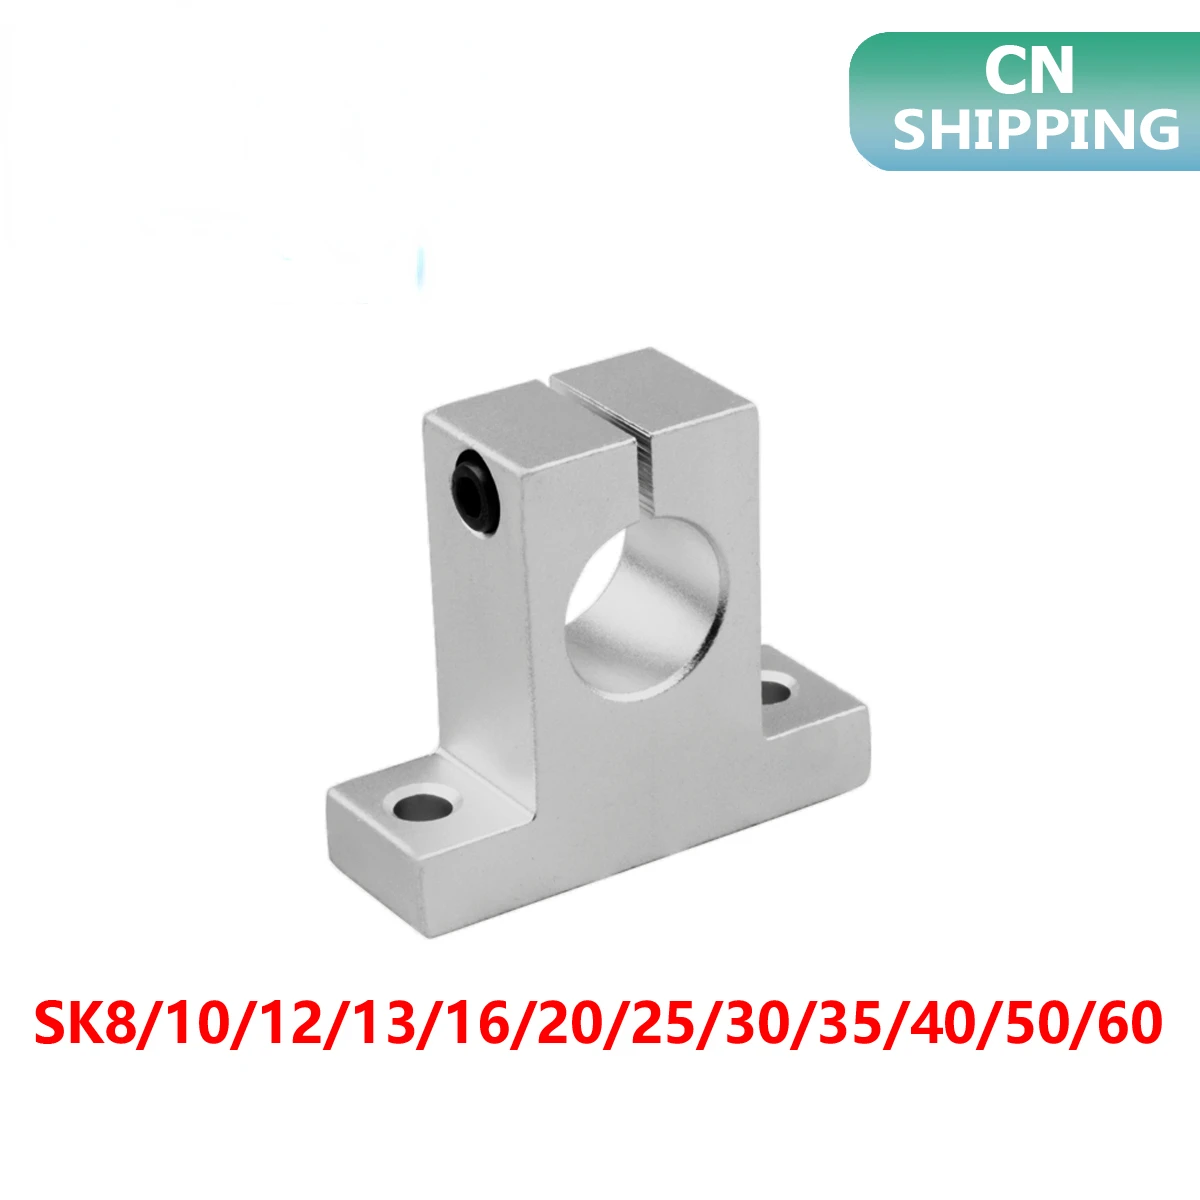 

SK25 SK30 SK35 SK40 SK50 SK60 Linear Bearing Rail Shaft Support for Optical Axis CNC XYZ Table Rail Block Alloy 25/30/35/40